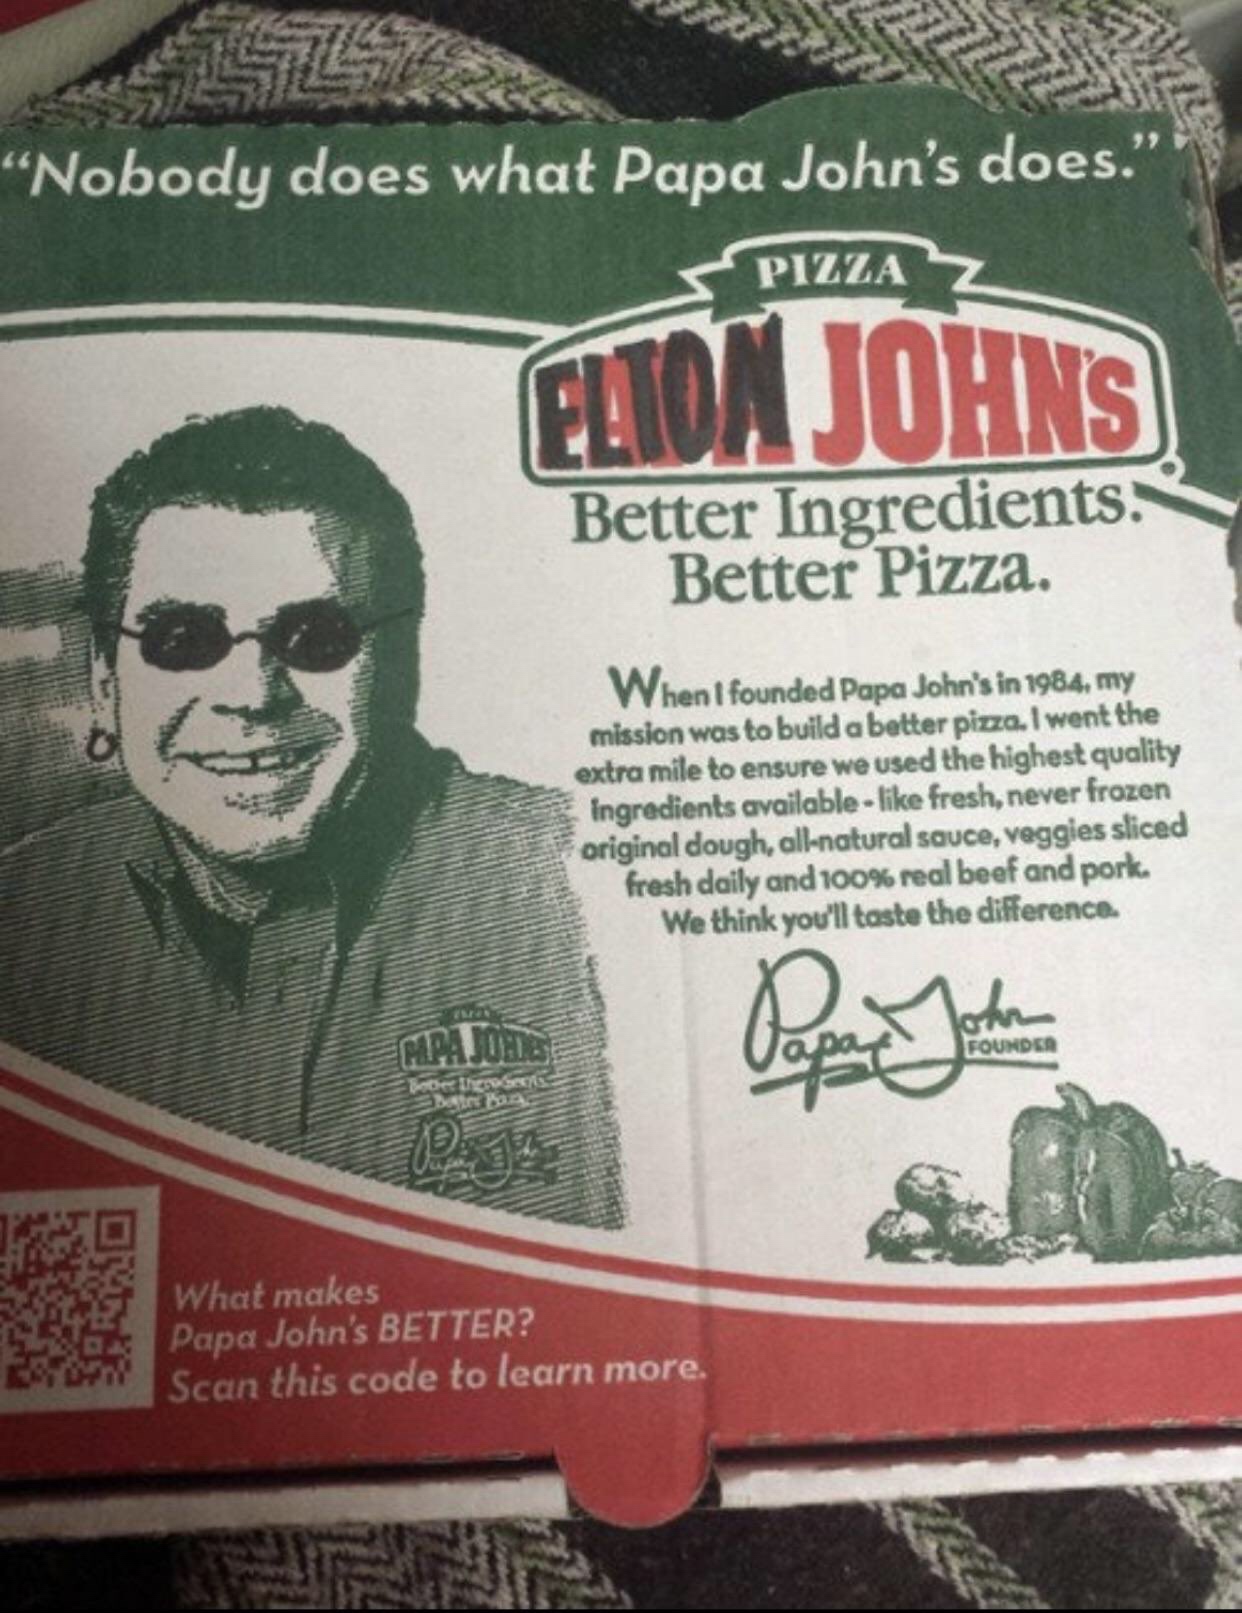 papa elton john - Nobody does what Papa John's does." Pizza Elton Johns Better Ingredients. Better Pizza. When I founded Papa John's in 1984, my mission was to build a better pizza. I went the extra mile to ensure we used the highest quality ingredients a